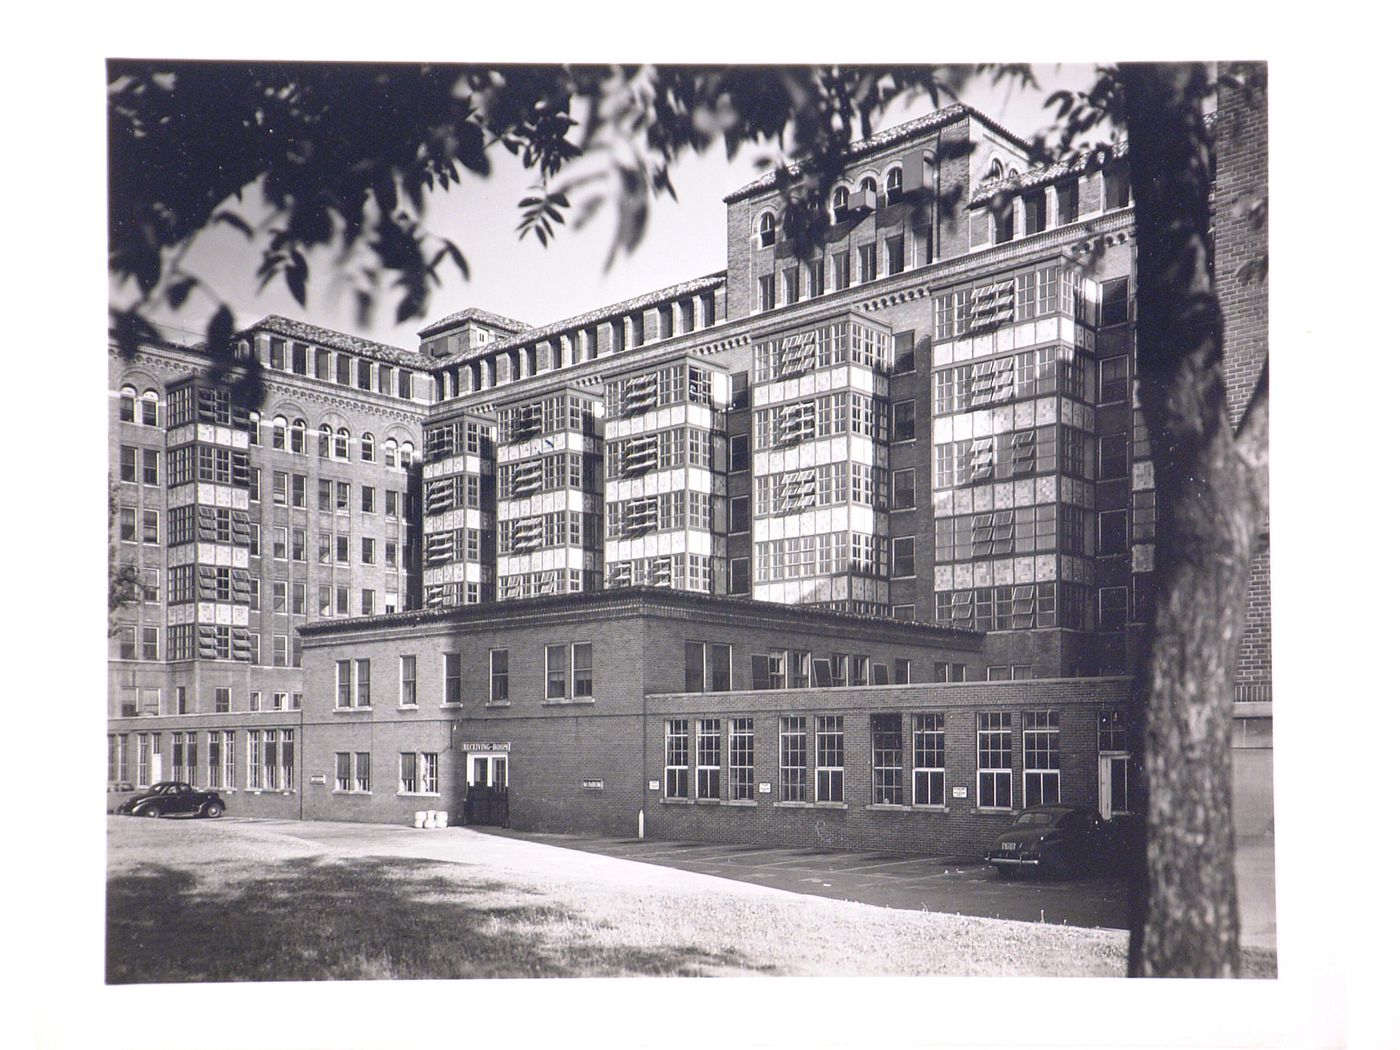 View of the rear [?] façade of the Tuberculosis Building, Herman Kiefer Hospital, Detroit, Michigan